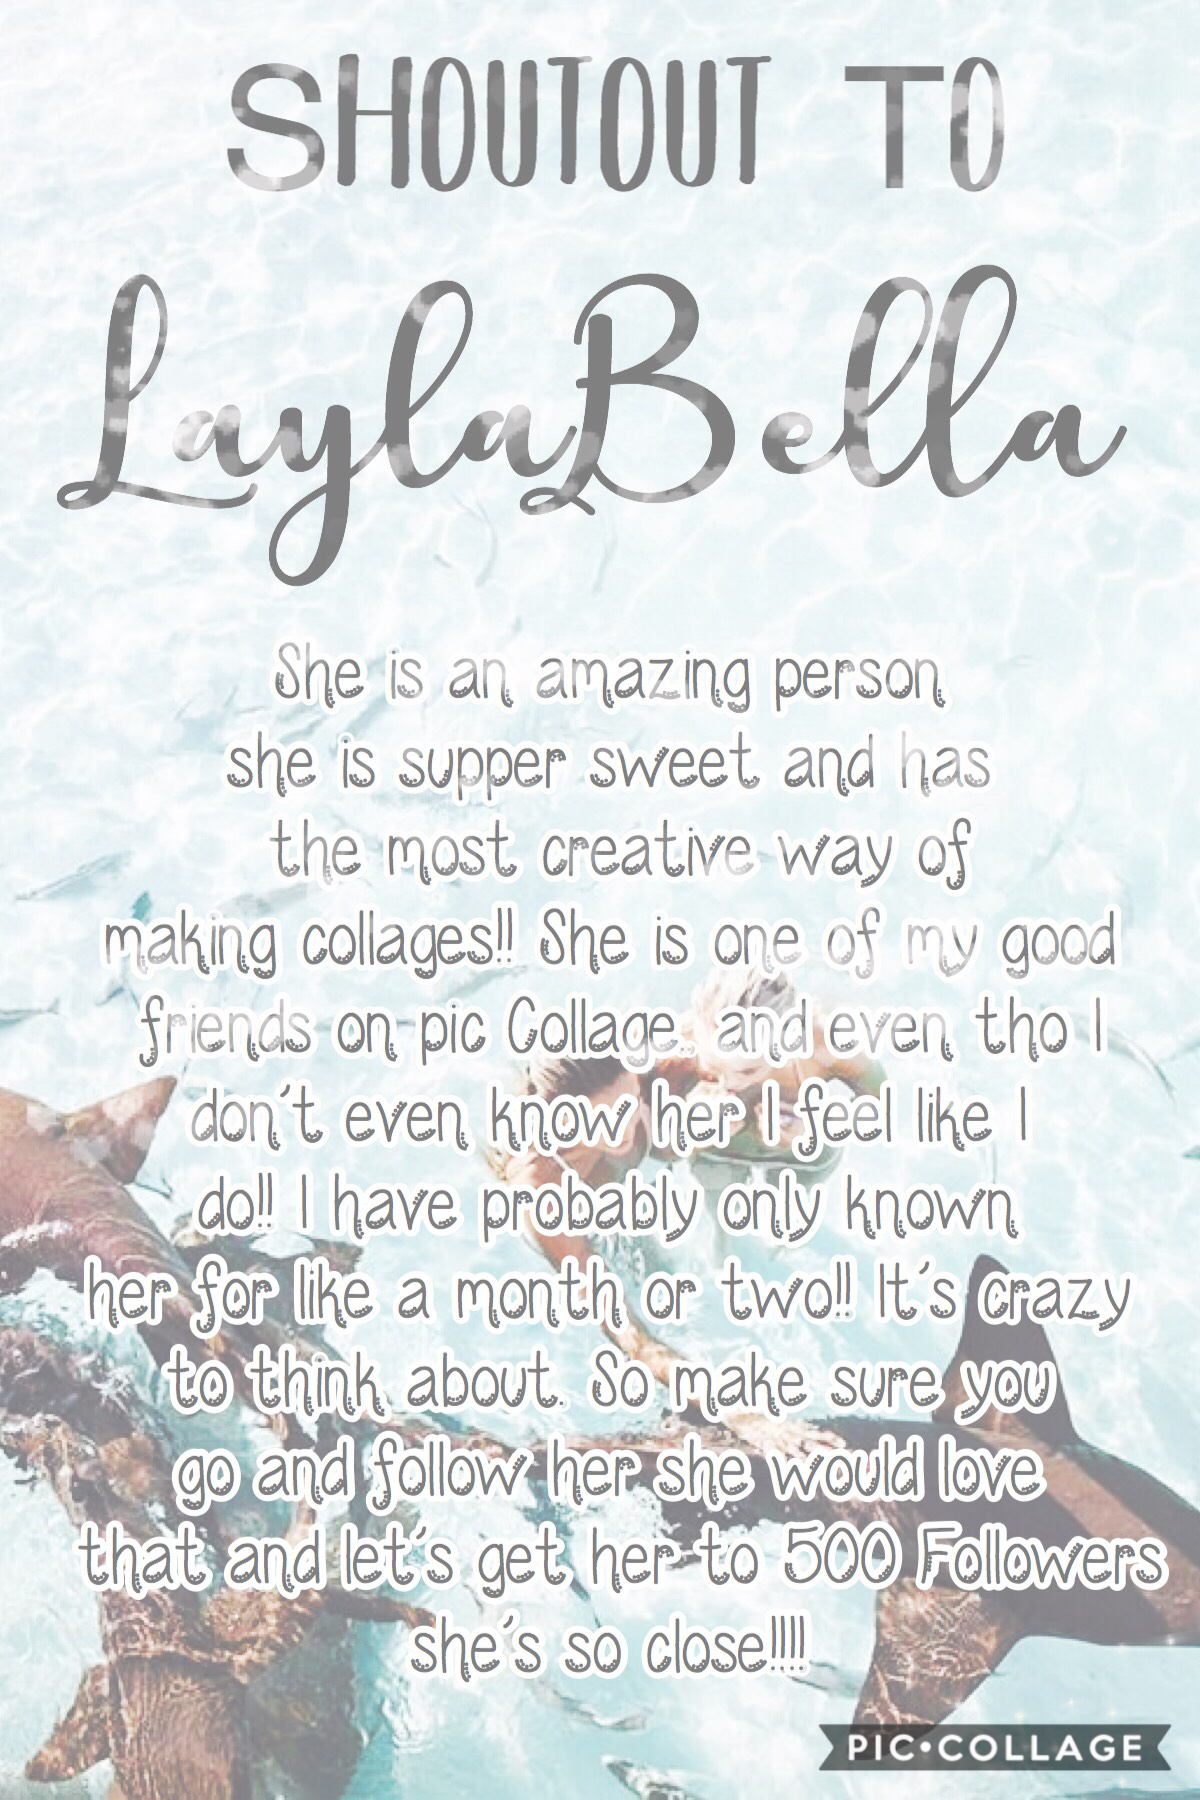 Shoutout To...... 
the amazing LaylaBella
She is an amazing person let’s get her to 500 Followers 💕